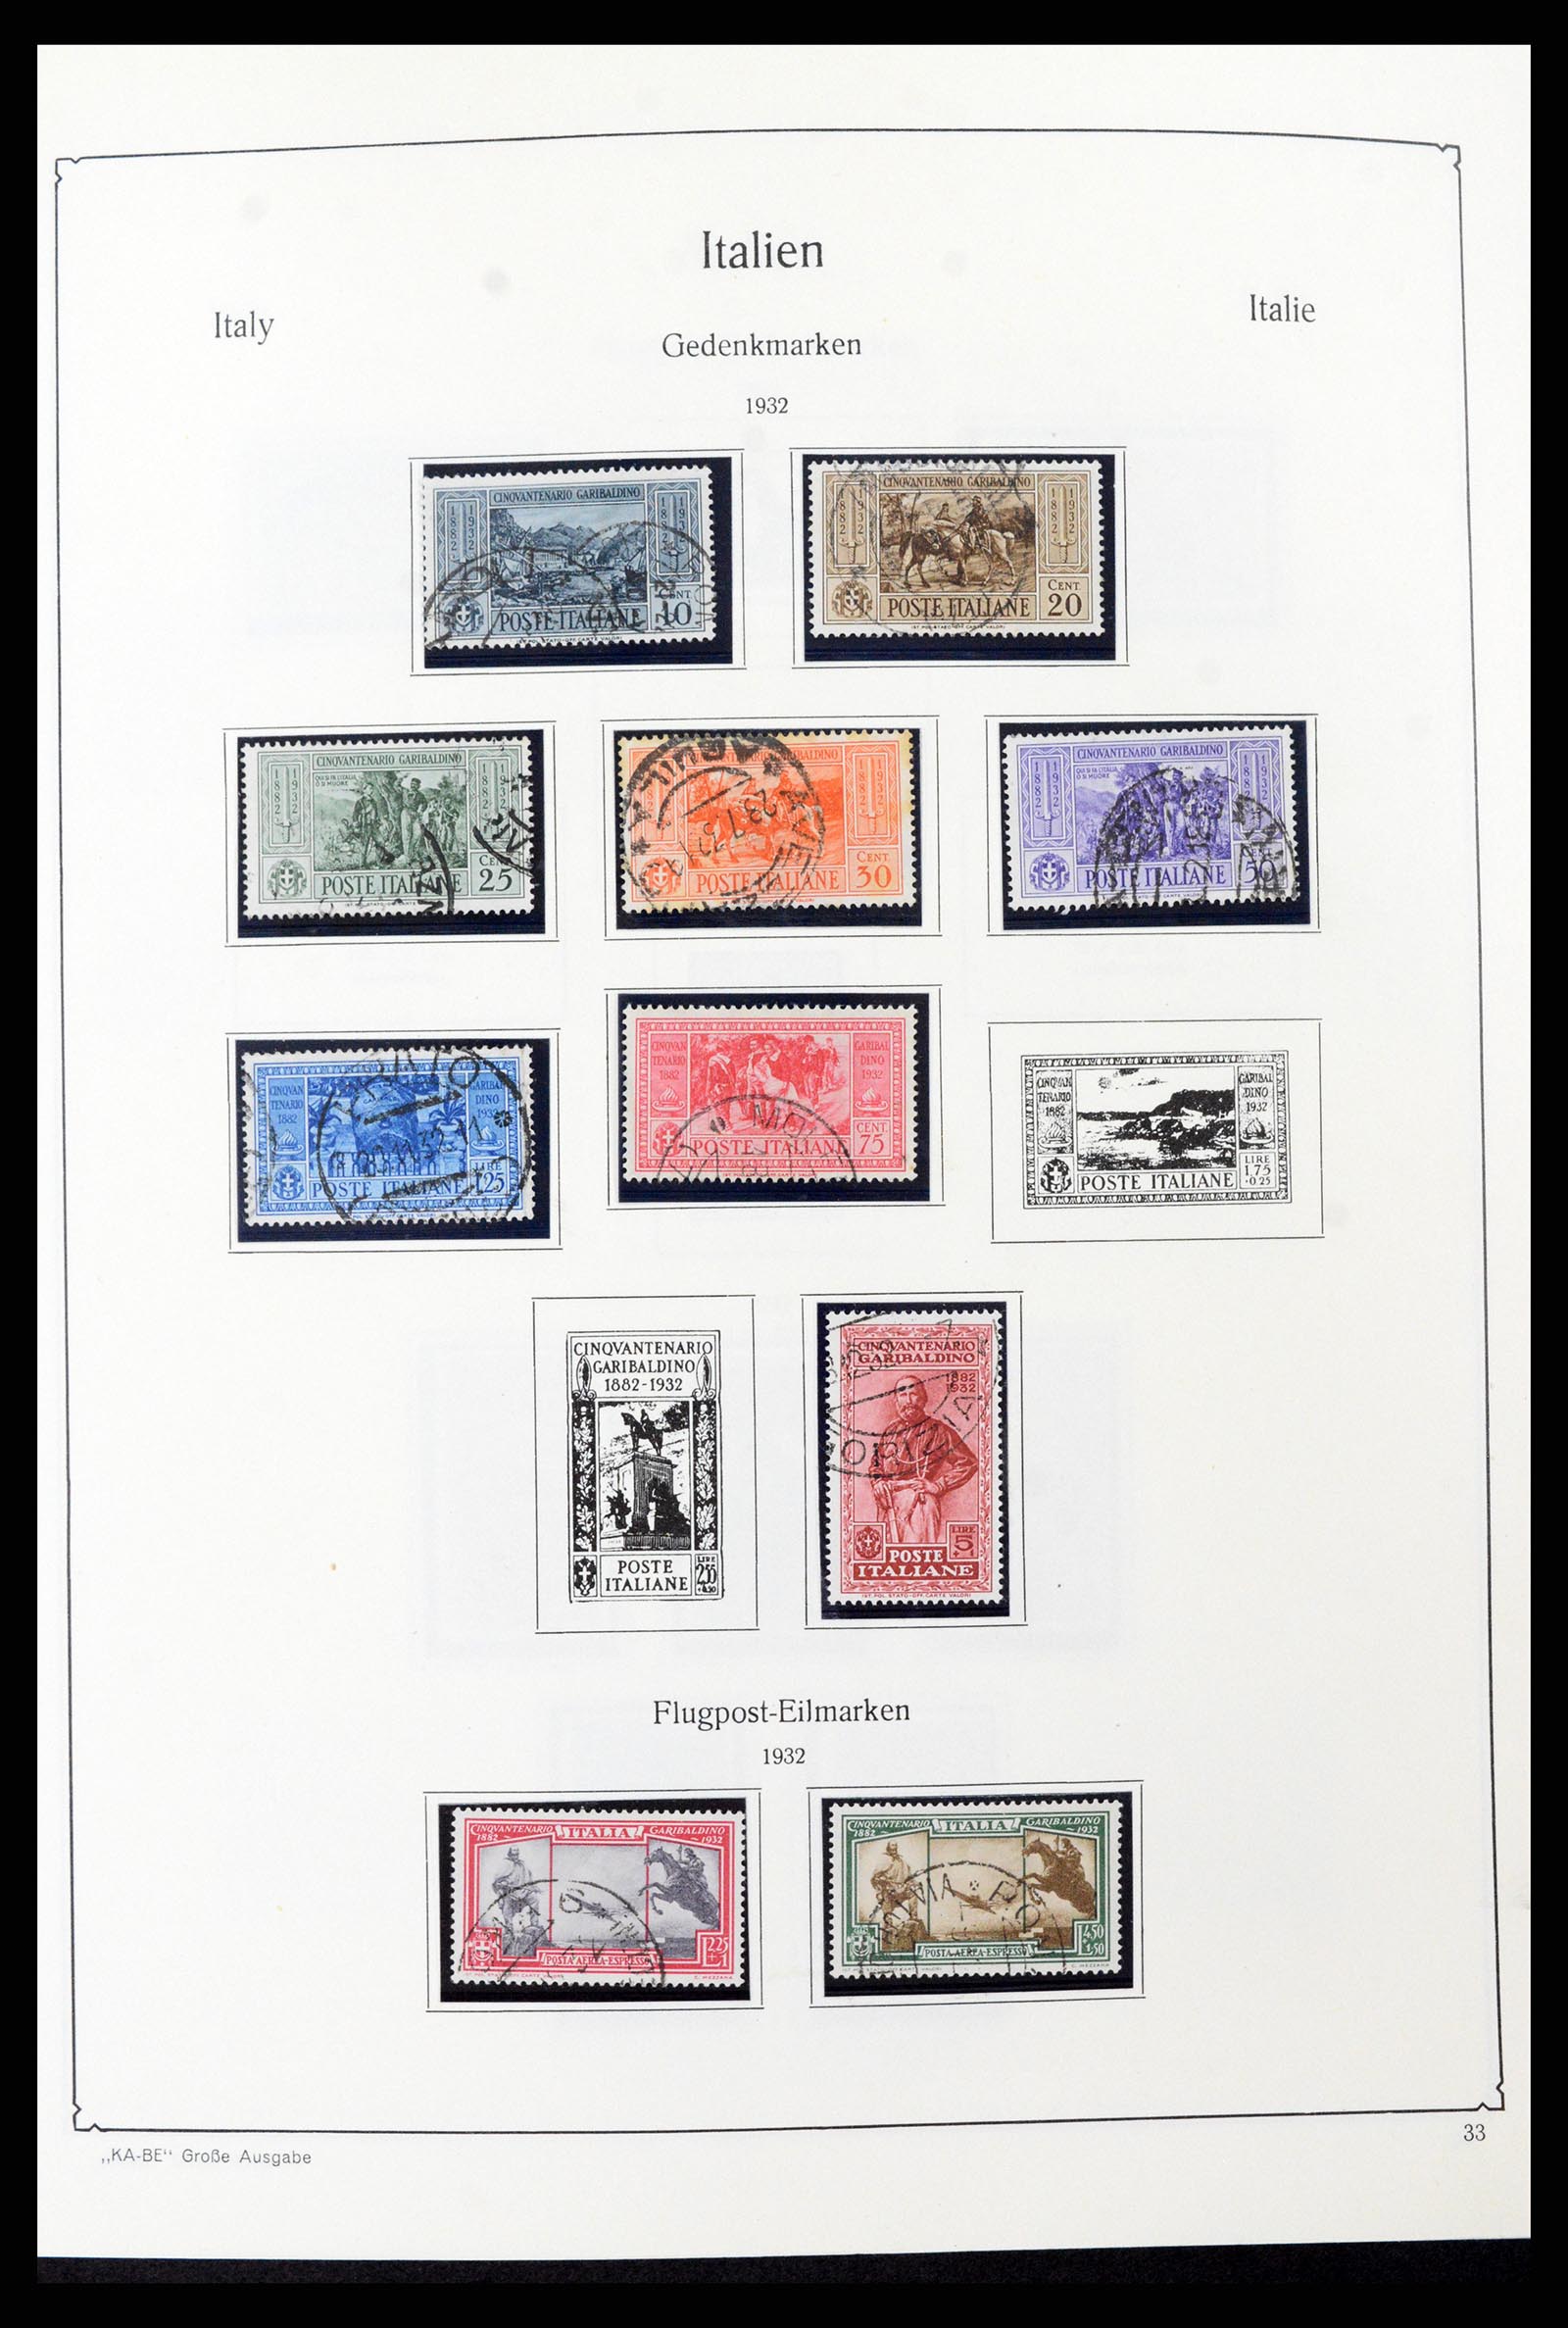 37605 051 - Stamp collection 37605 Italy and States 1855-1974.